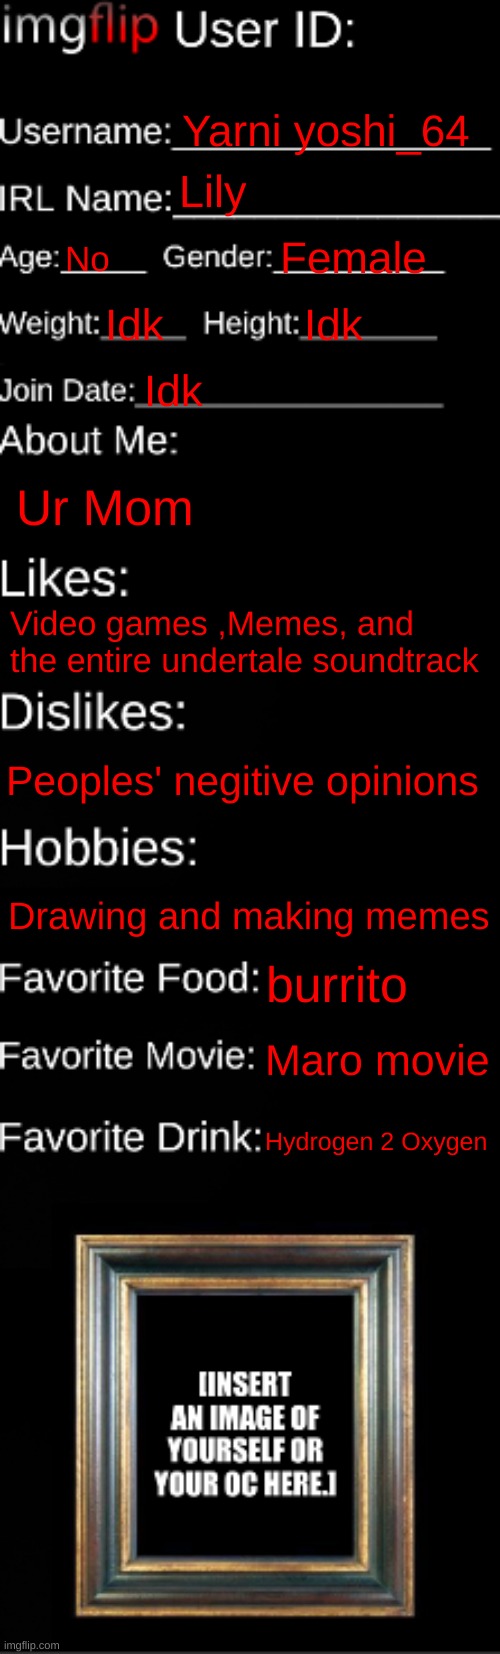 Get to know me!(heavily meme-fied) | Yarni yoshi_64; Lily; No; Female; Idk; Idk; Idk; Ur Mom; Video games ,Memes, and the entire undertale soundtrack; Peoples' negitive opinions; Drawing and making memes; burrito; Maro movie; Hydrogen 2 Oxygen | image tagged in imgflip id card | made w/ Imgflip meme maker